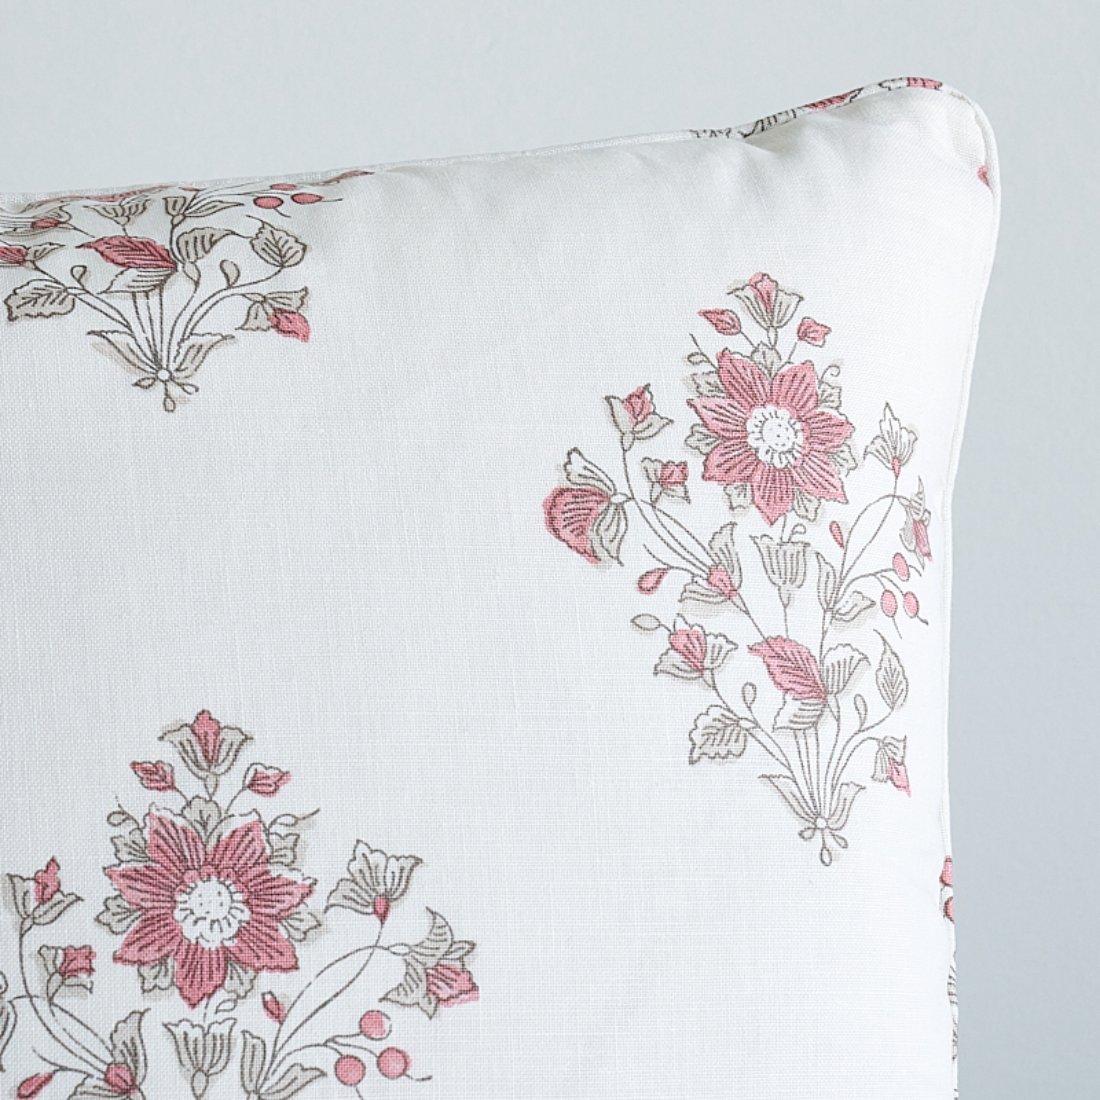 This pillow features Beatrice Bouquet by Matthew Patrick Smyth with a self welt finish. Adapted from an antique Indian woodblock print discovered in a textile archive, this interpretation by Matthew Patrick Smyth is as charming as it is